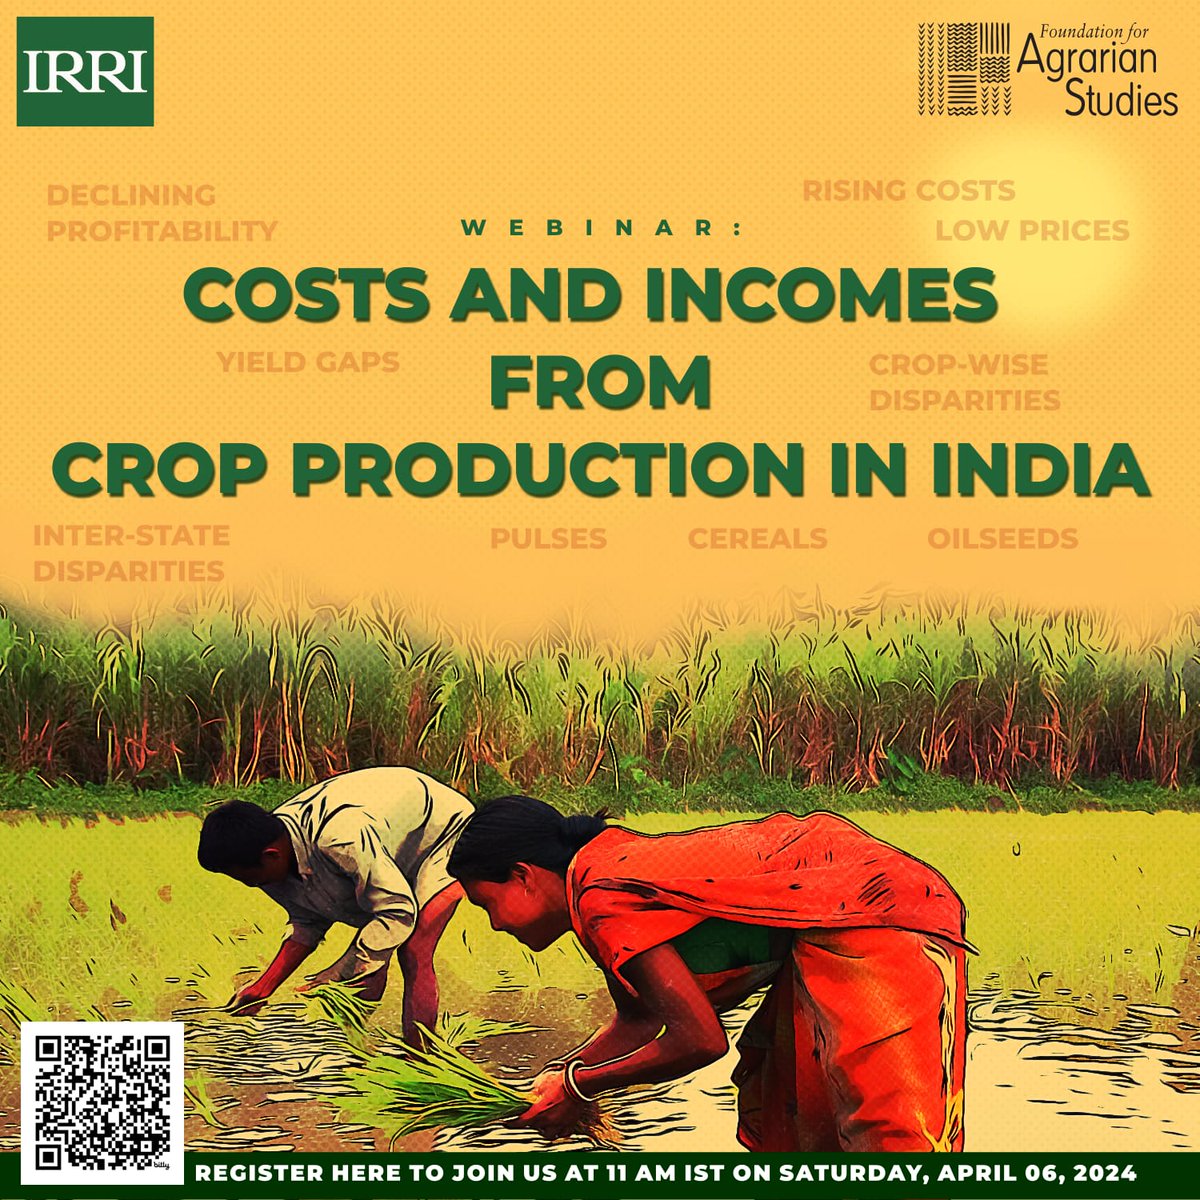 As the issue of MSP takes centre stage the issue of what constitutes 'remunerative' prices (thus, incomes) for agri commodities is necessarily tied to the issue of costs. Join this interesting discussion on this important theme tomorrow, organised by @fasagristudies @deepakmercy